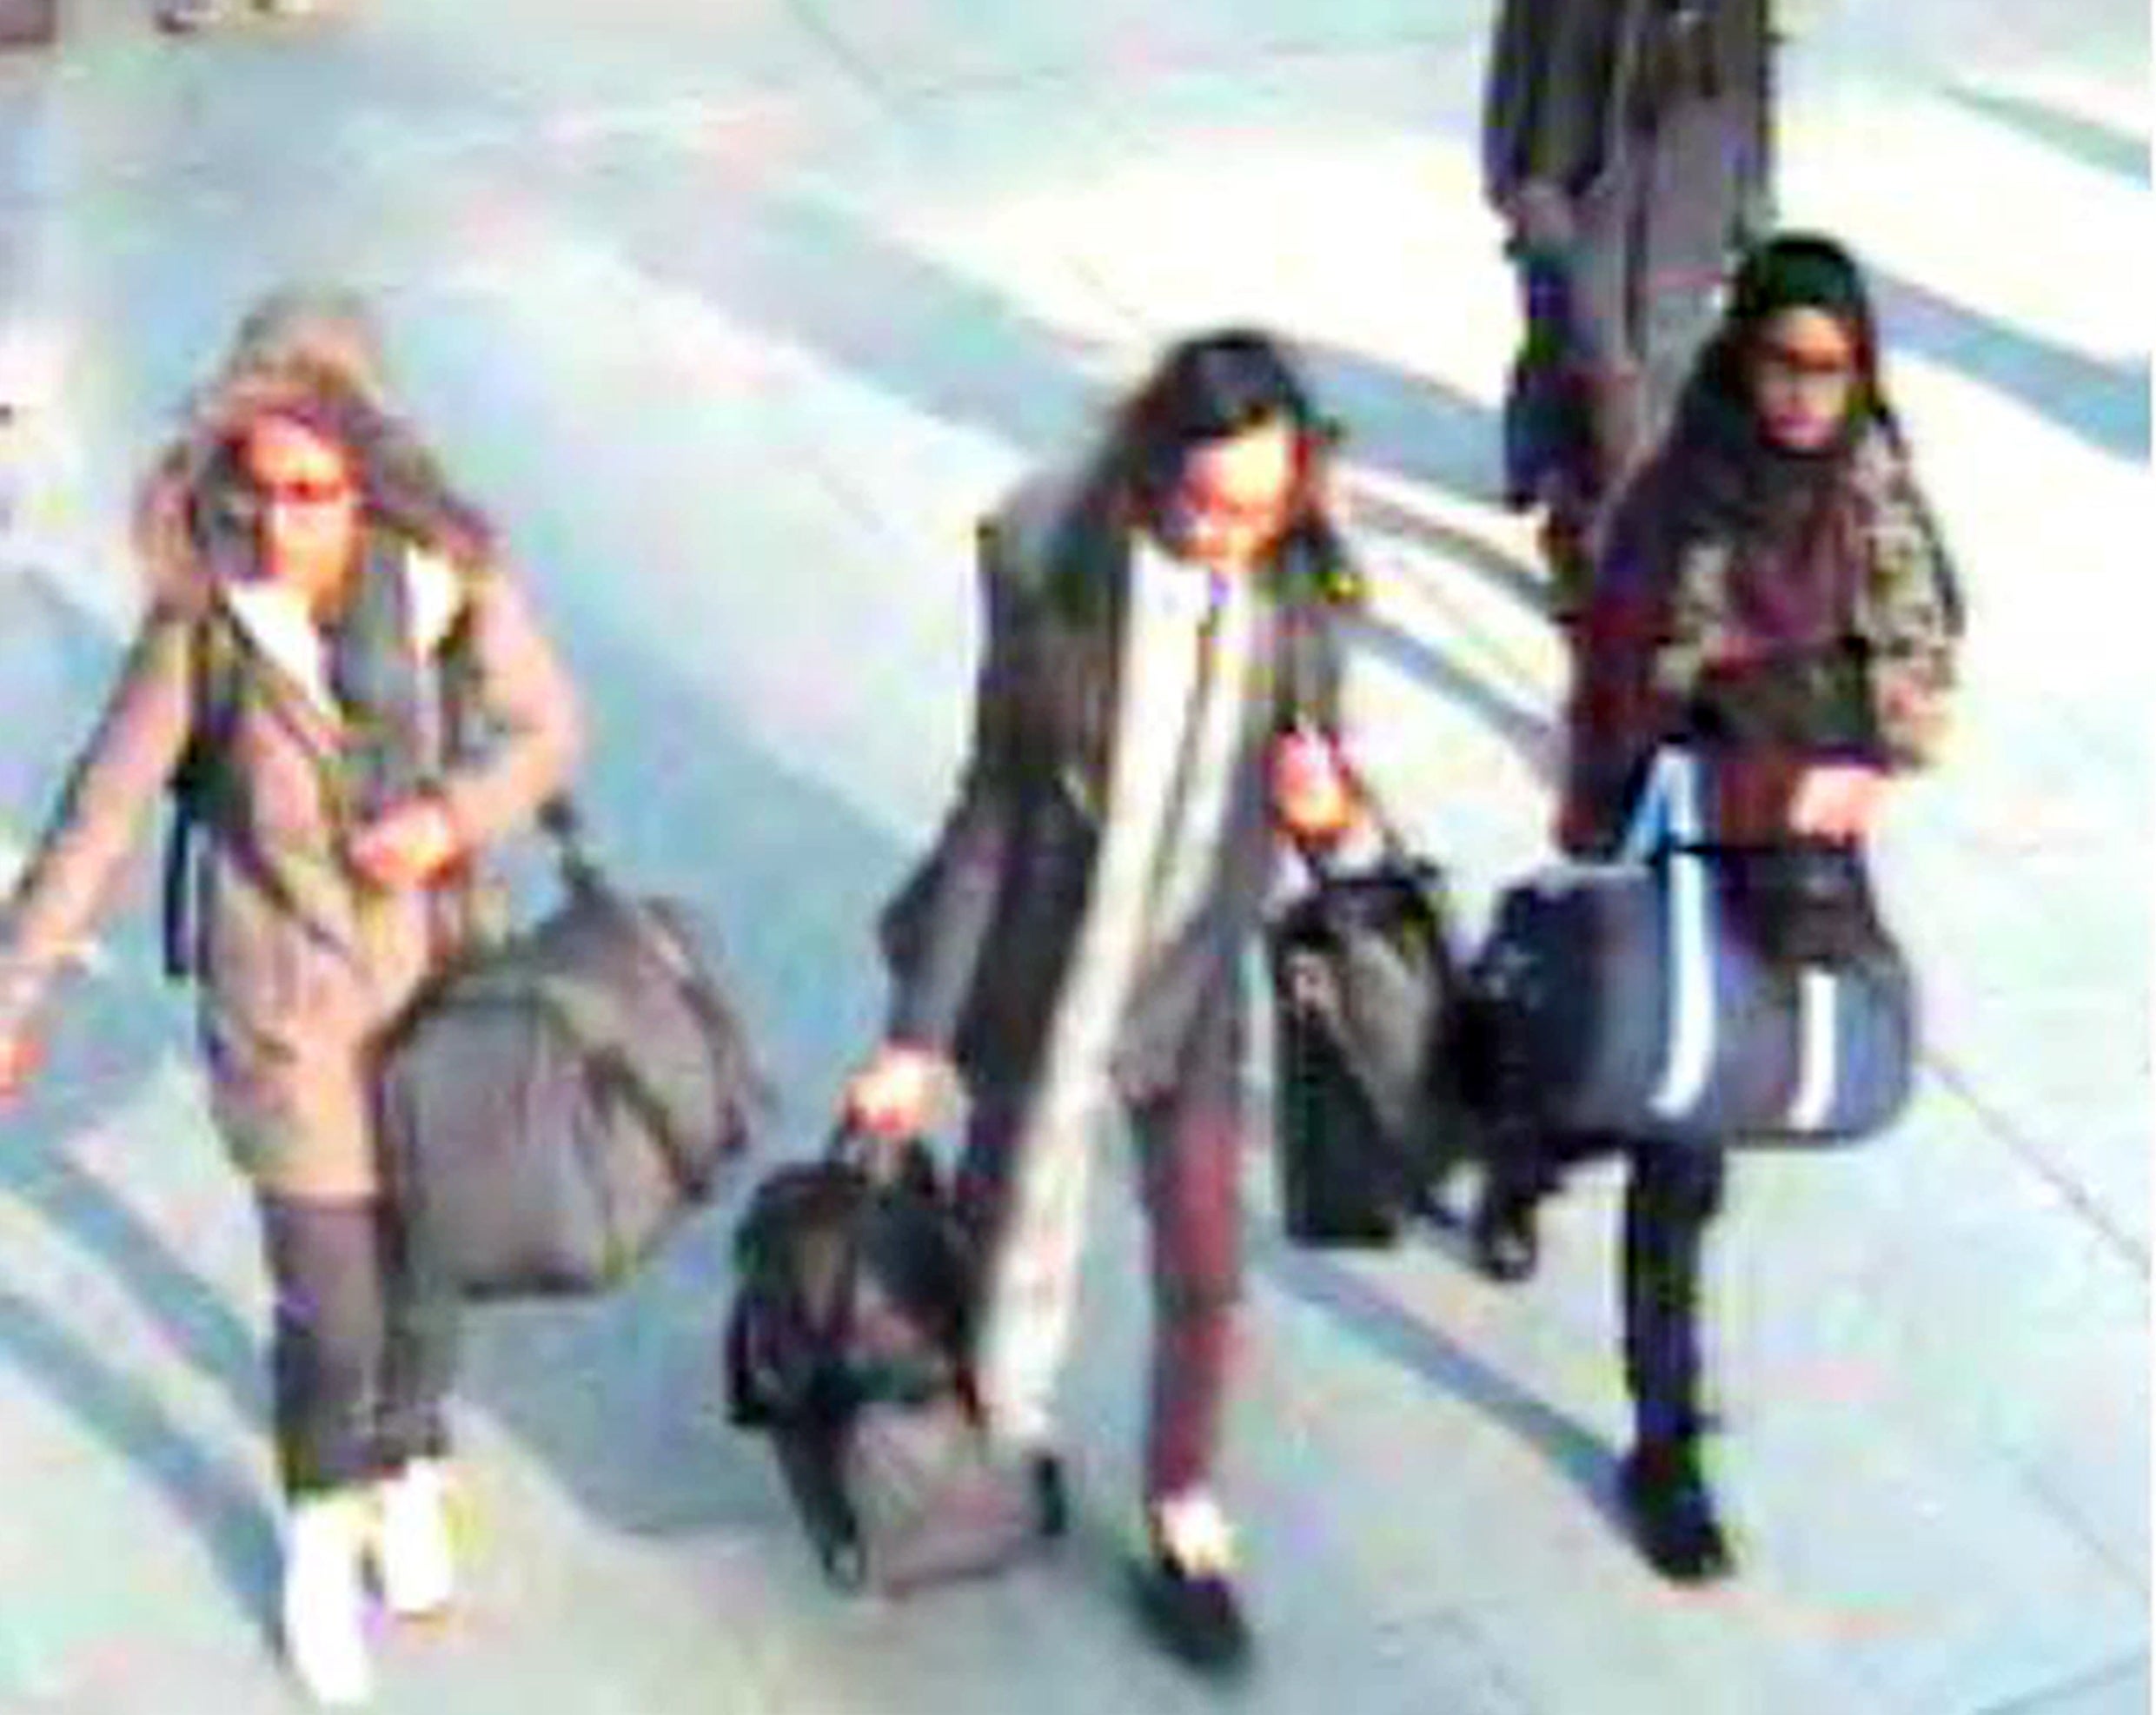 Image taken from CCTV issued by the Metropolitan Police of (left to right) 15-year-old Amira Abase, Kadiza Sultana,16, and Shamima Begum,15, at Gatwick airport, before they caught their flight to Turkey in 2015